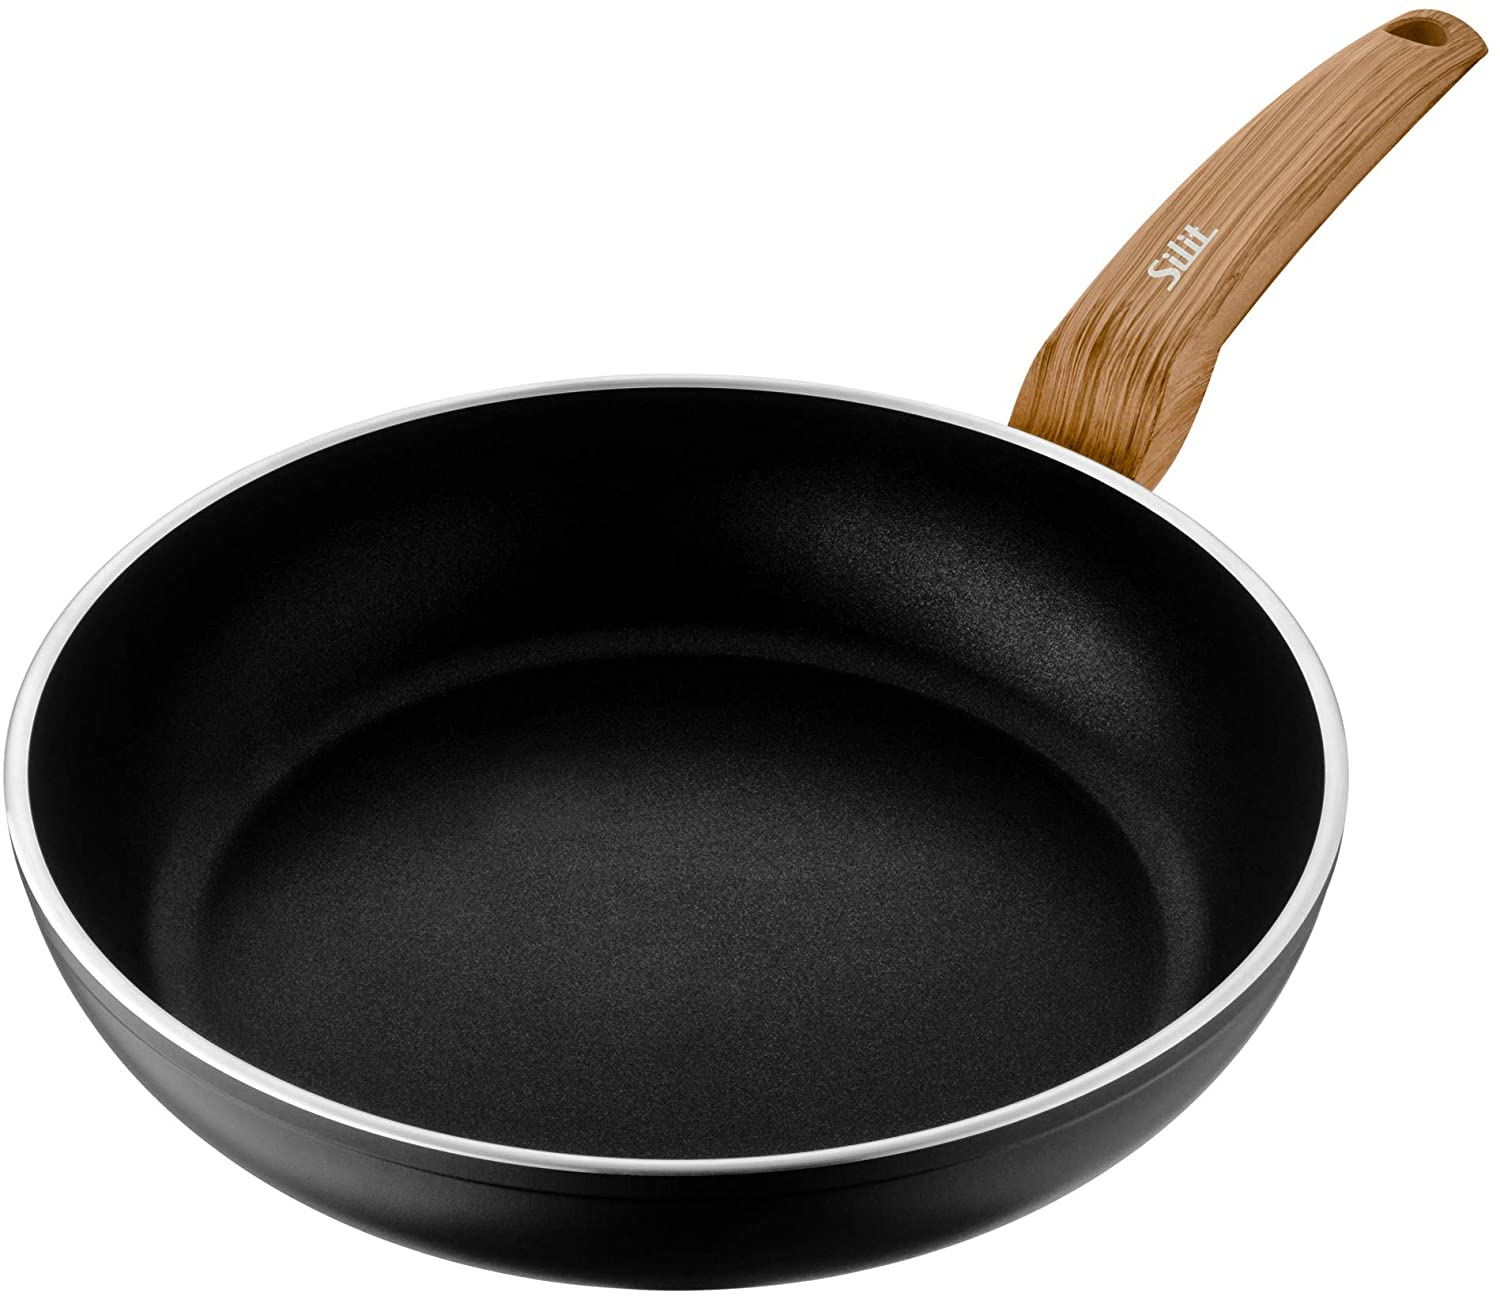 Silit Faggo Induction Frying Pan 28 cm Aluminium Coated with Plastic Handle for Gentle Frying